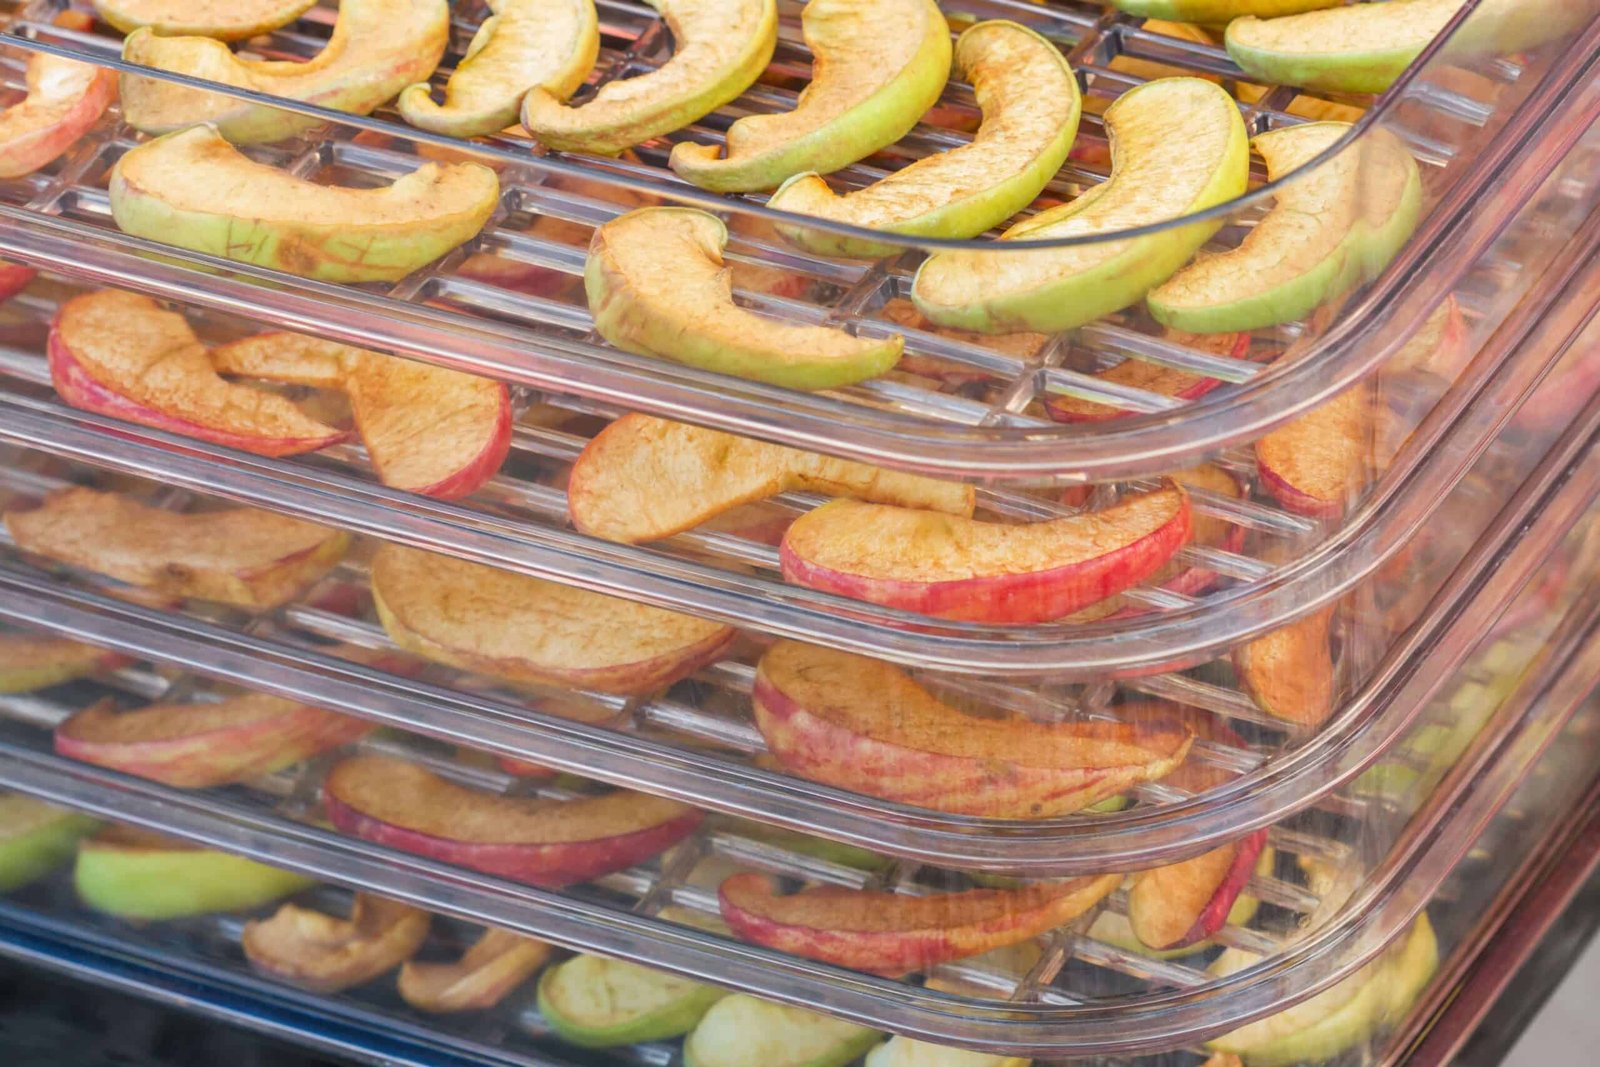 sliced finished dehydrated apples stacked in plastic trays